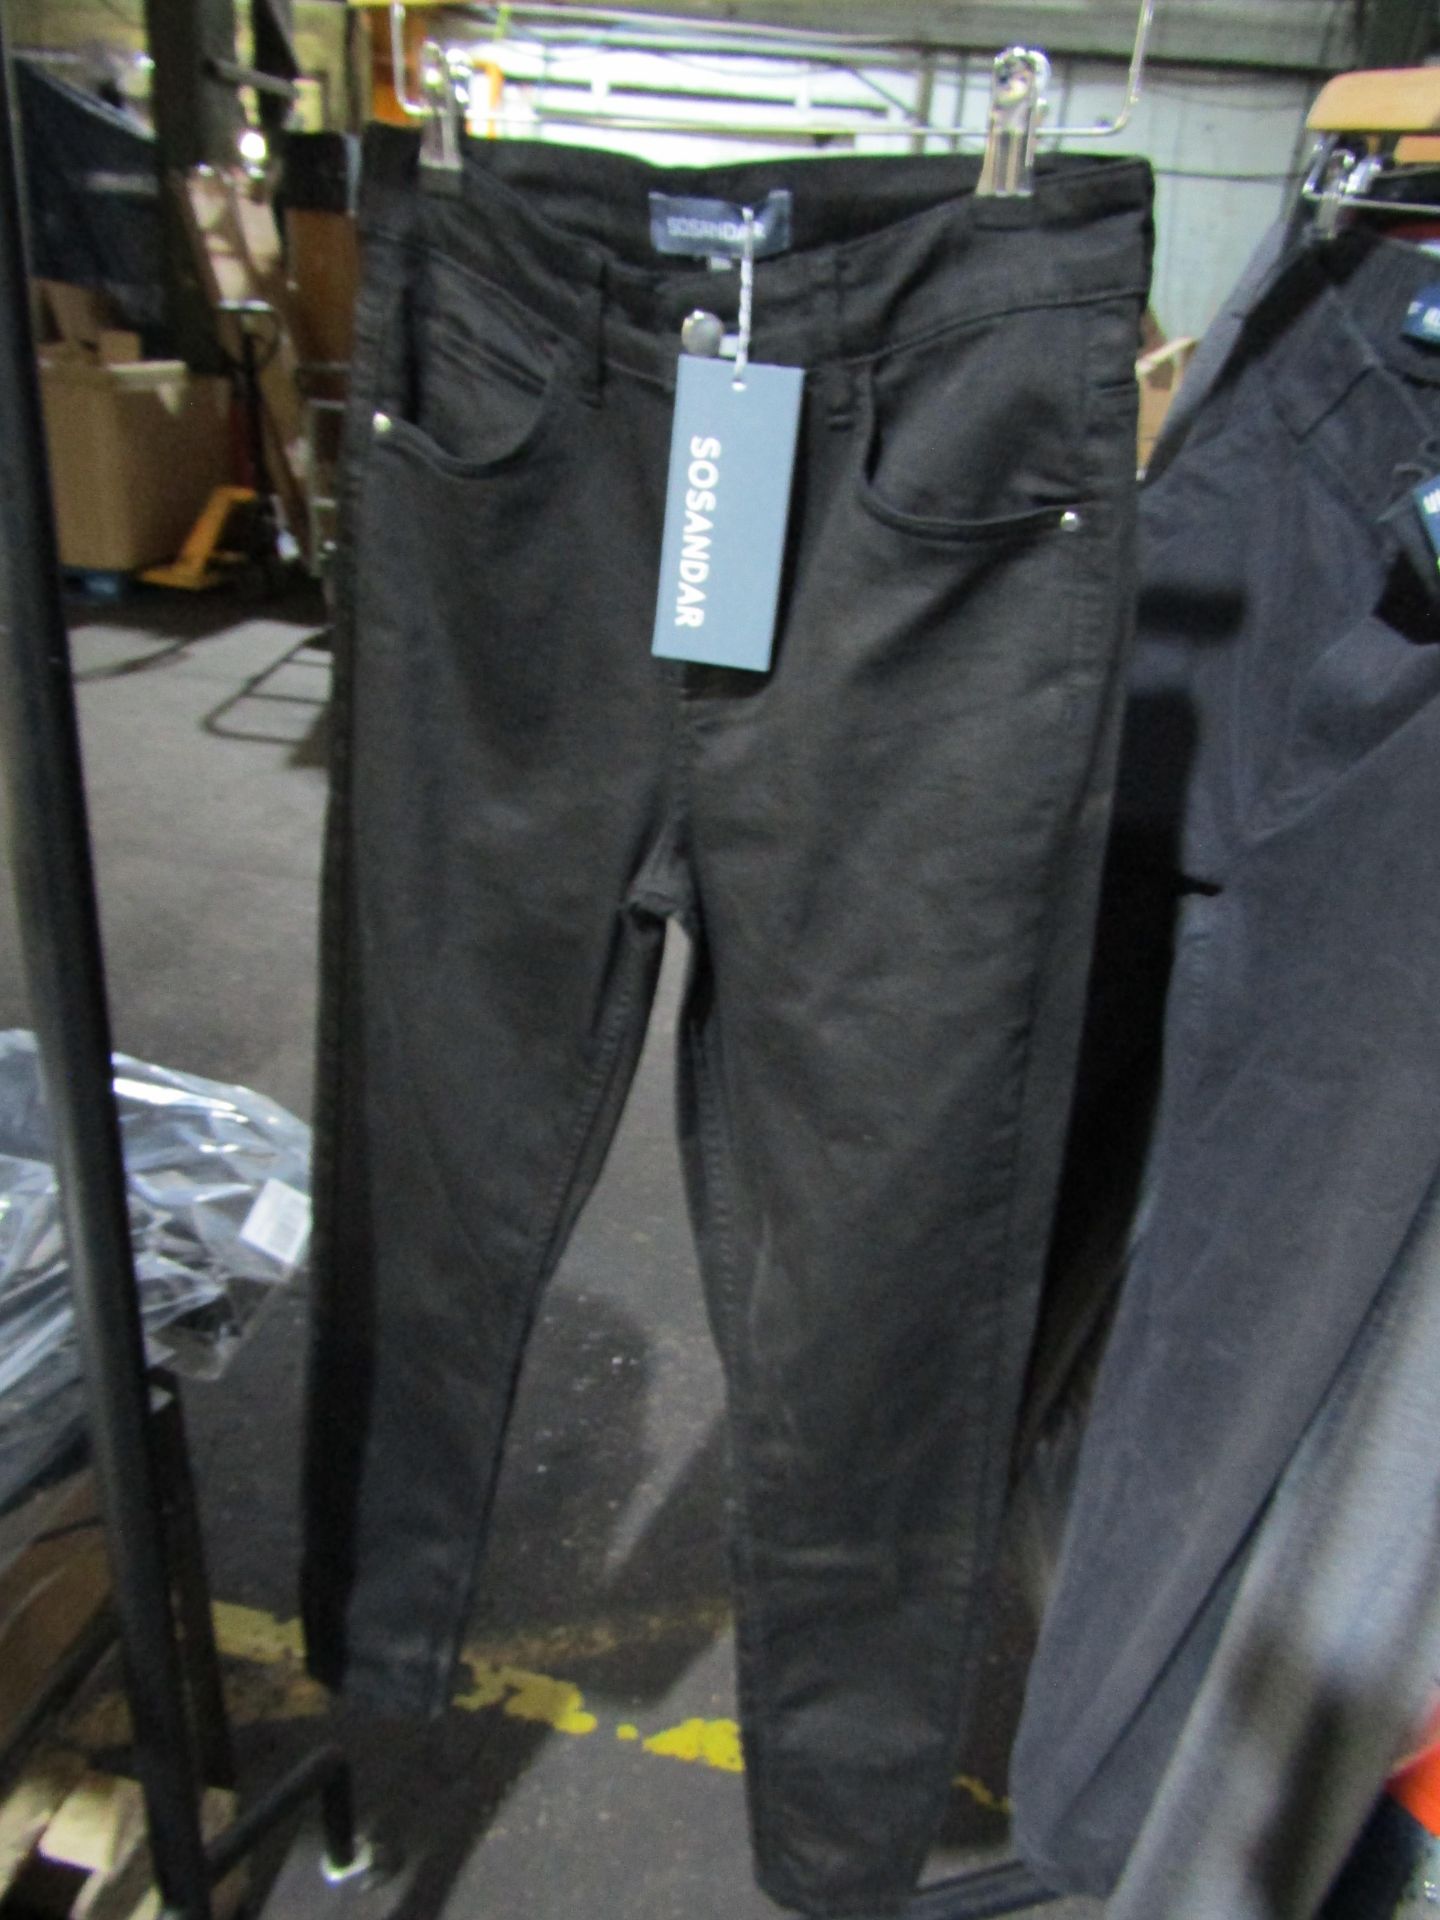 Sosandar ladies black perfect skinny jeans, new, size 10 Short, RRP œ55 at Marks and Spencers